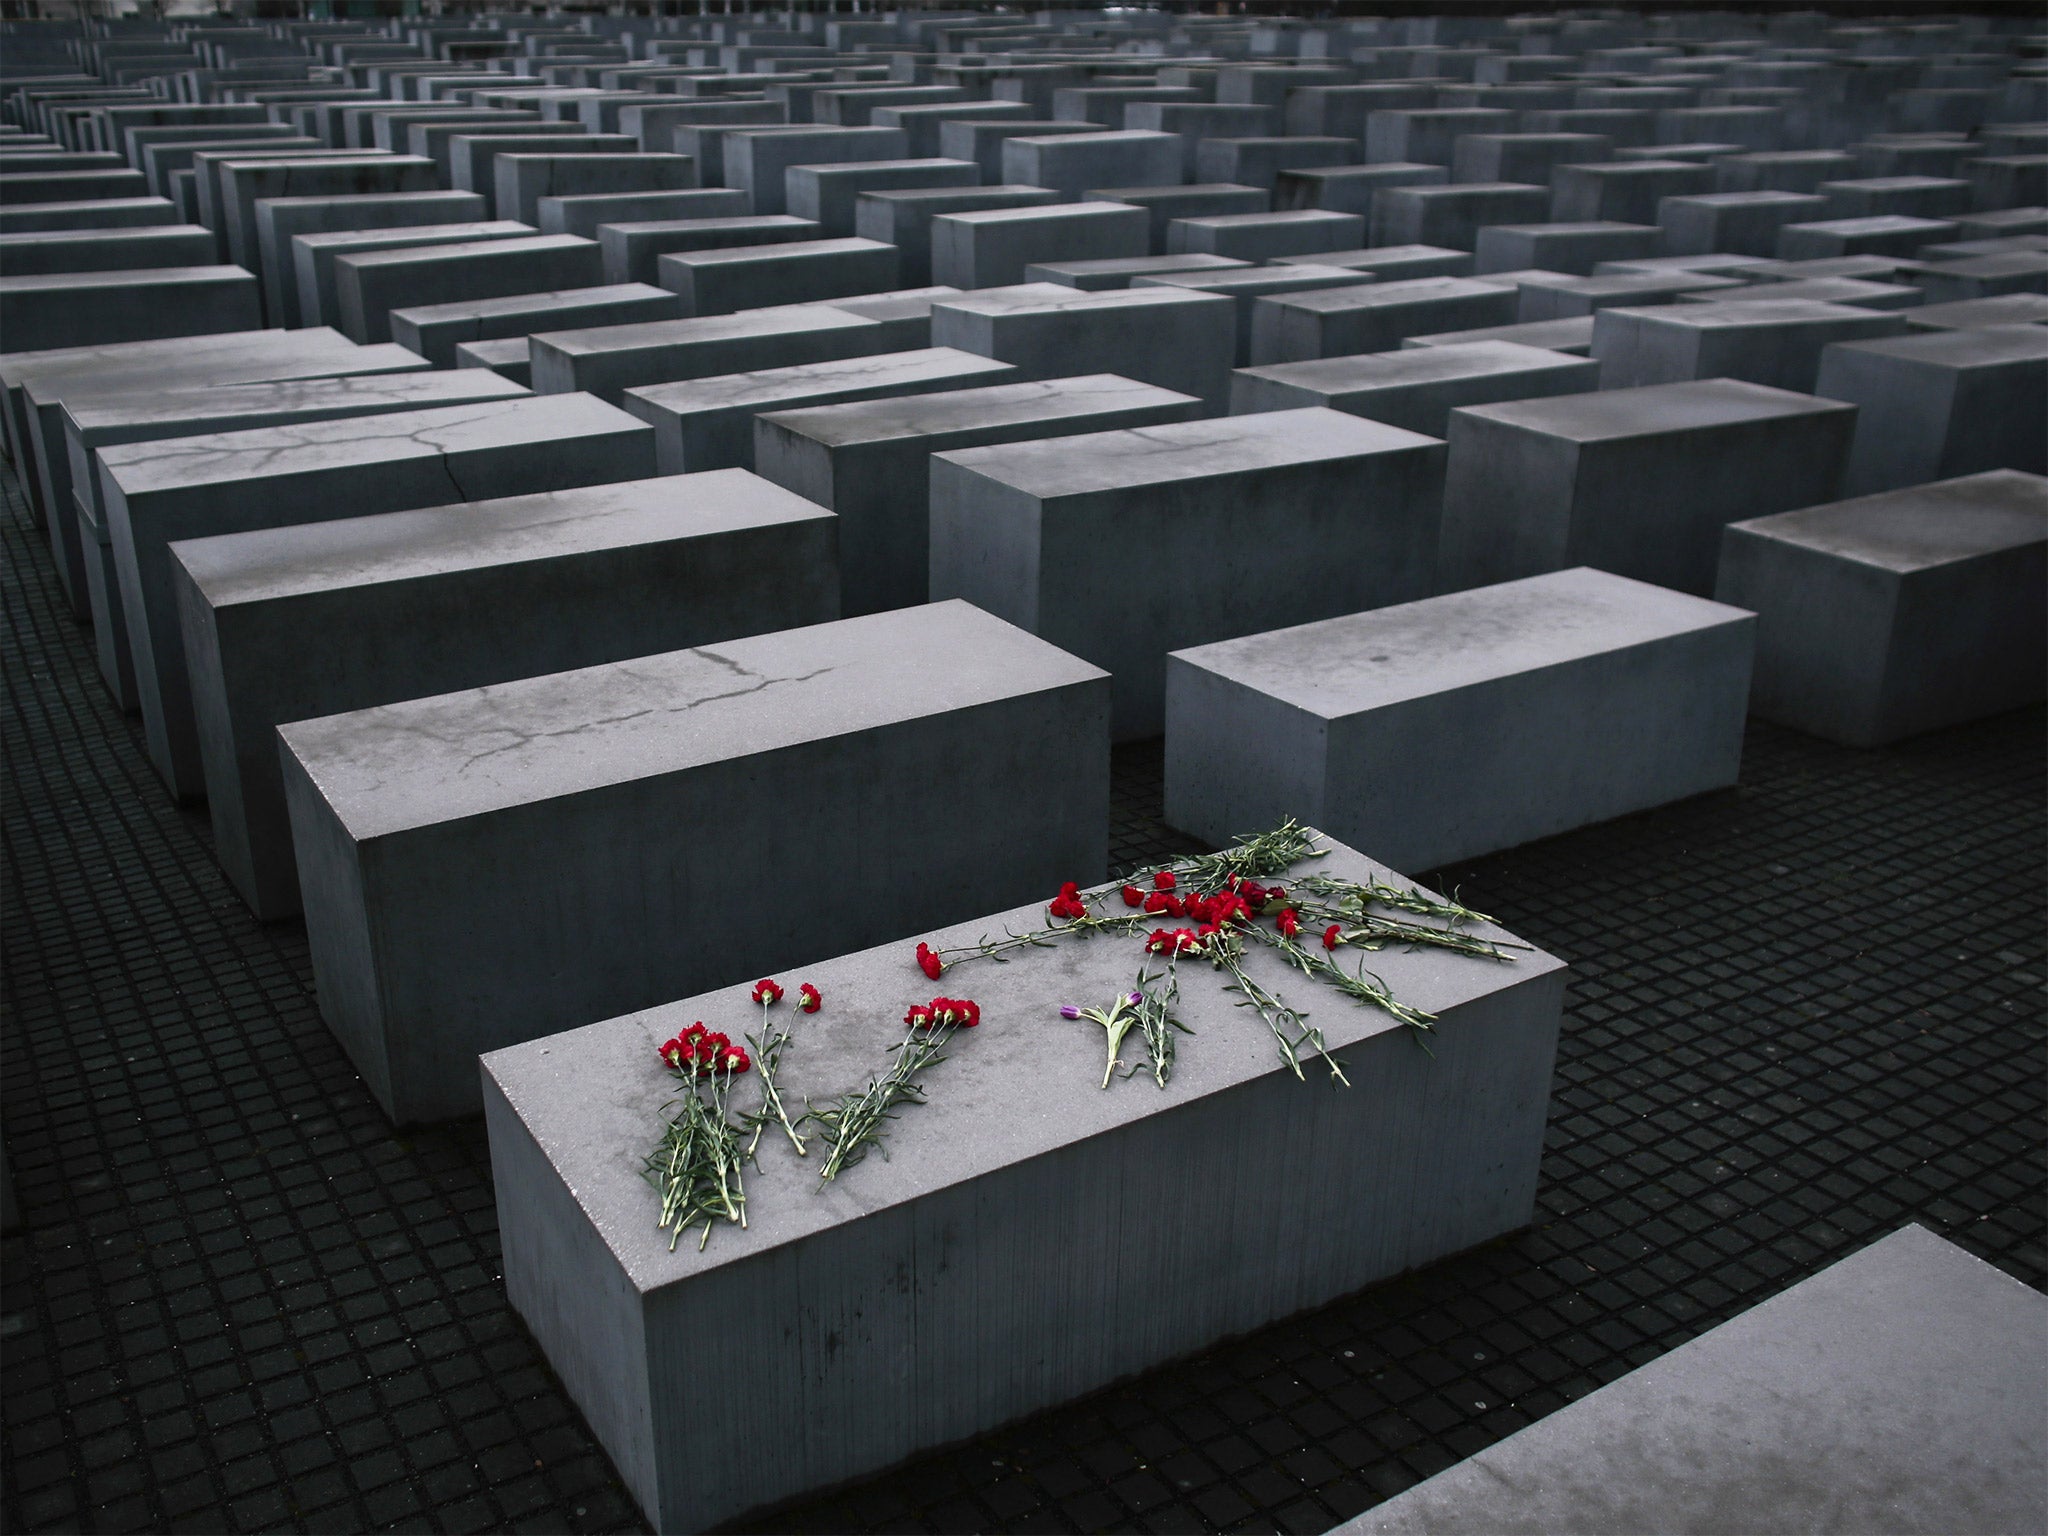 Floral tributes at the Holocaust Memorial in Berlin